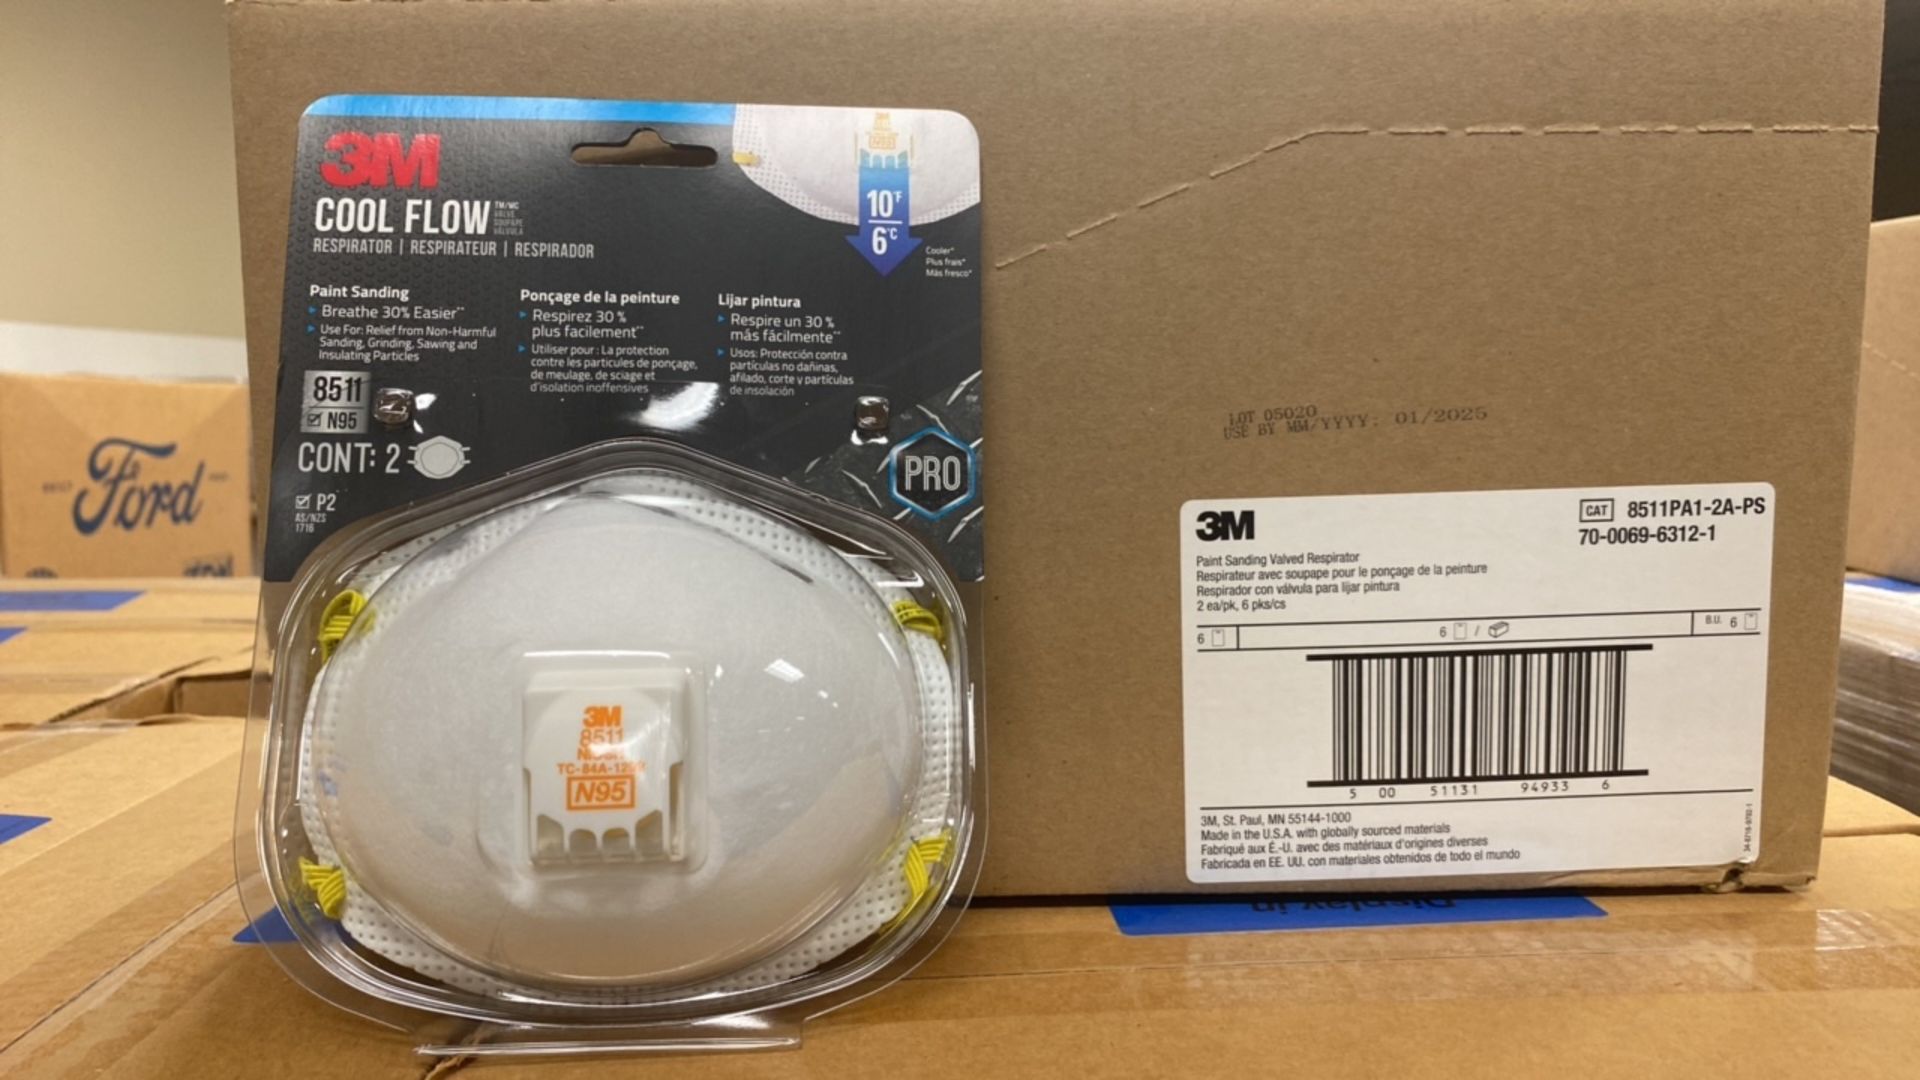 3M 8511PA1-2A-PS N95 PAINT SANDING VALVED RESPIRATOR QTY:113 CASES/ 12 PER CASE (+110 REBOXED